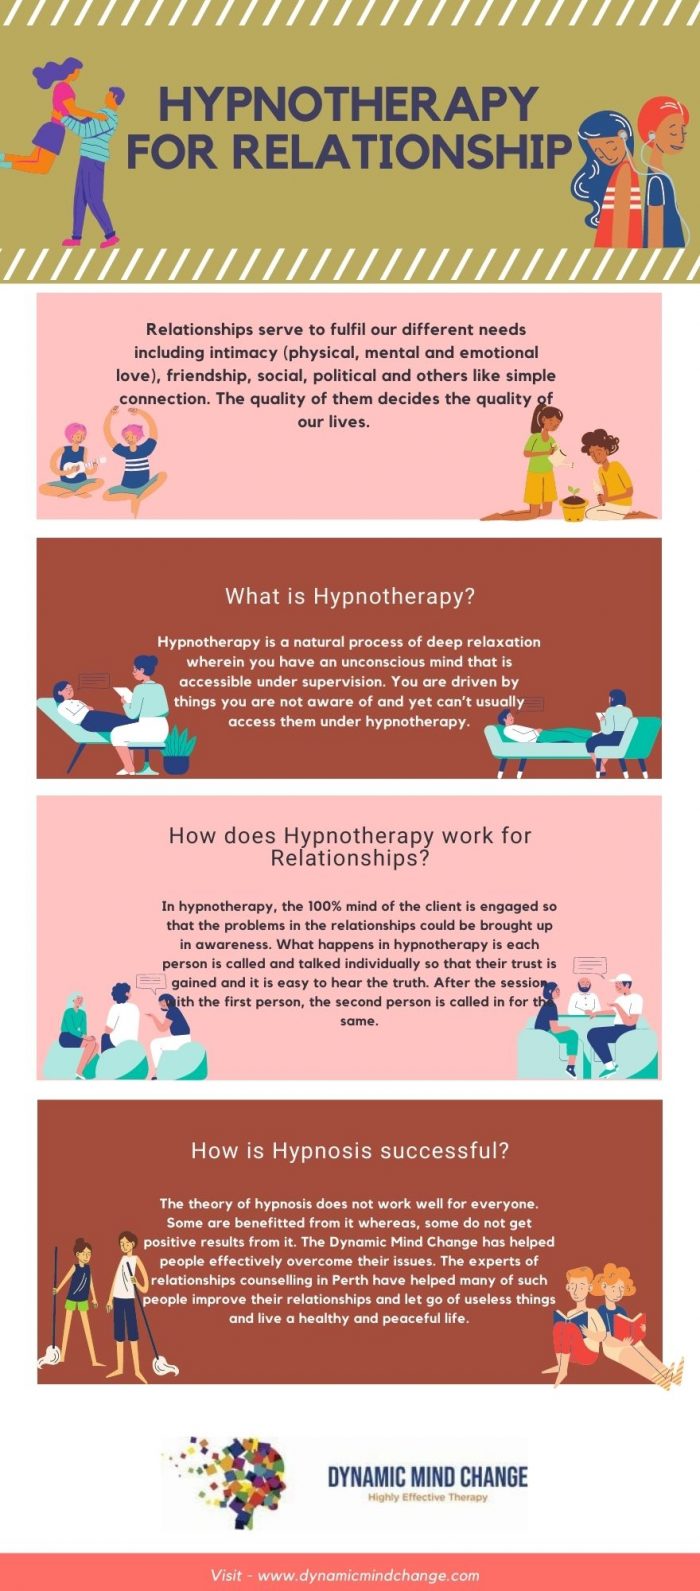 Hypnotherapy for Relationship